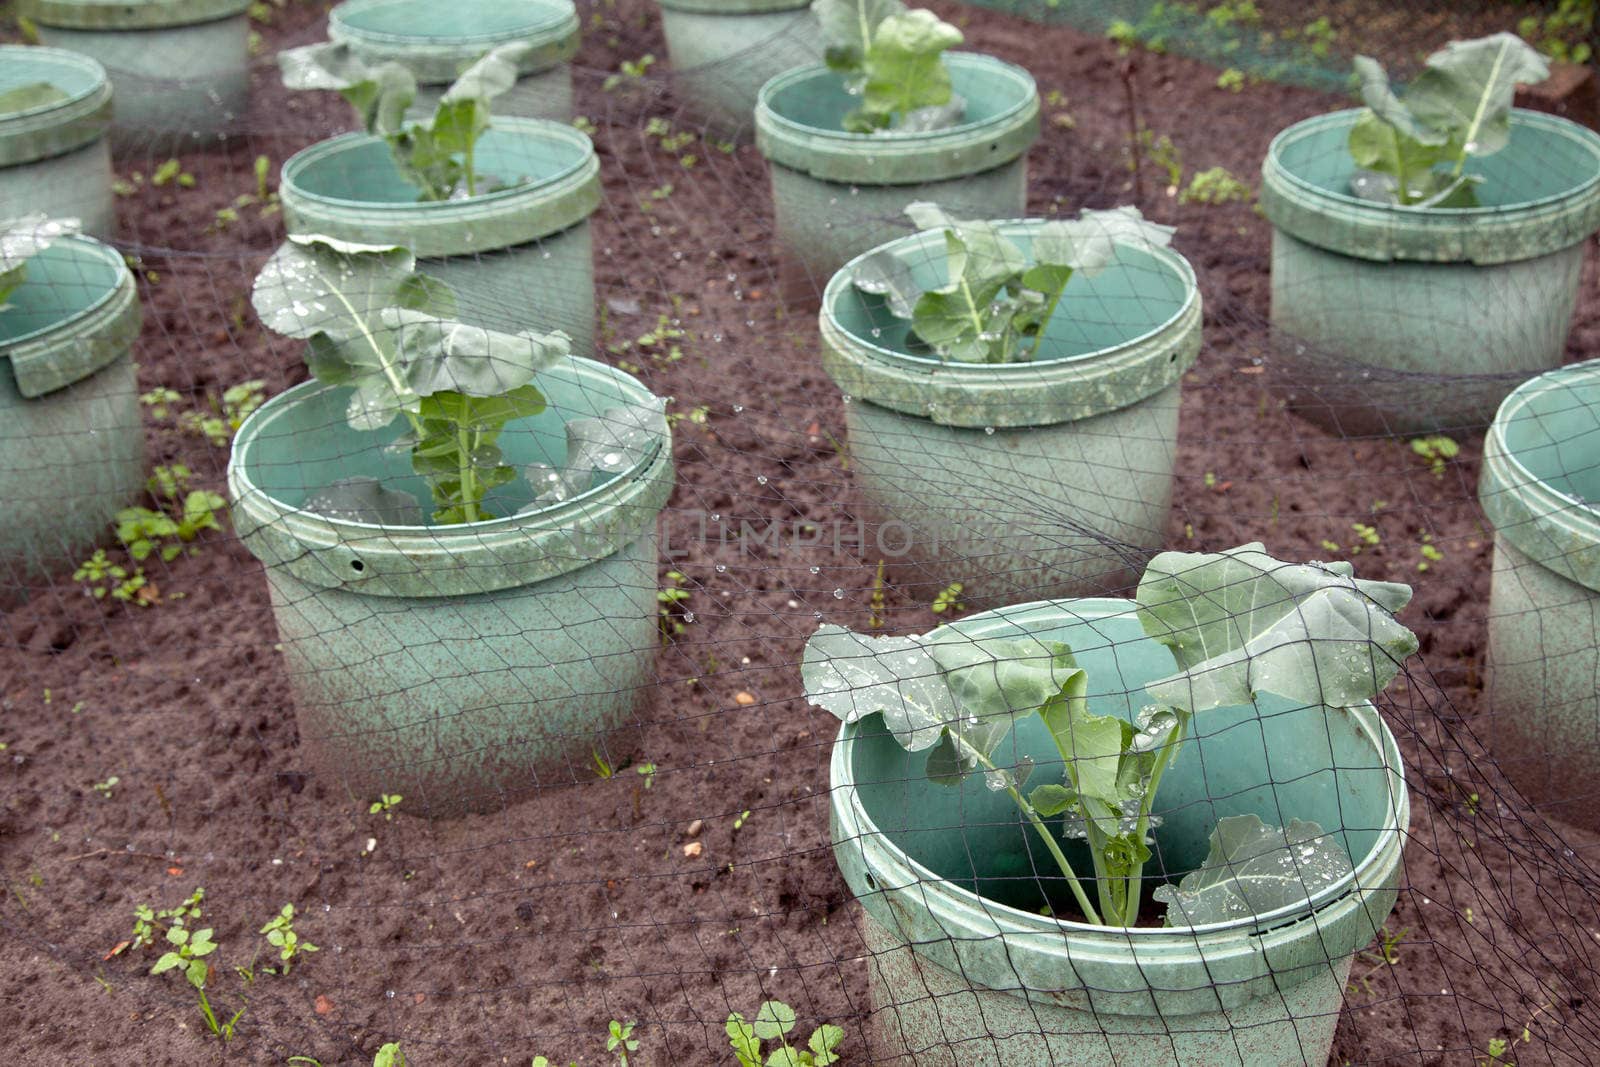 young cabbage plants in buckets in garden under netting